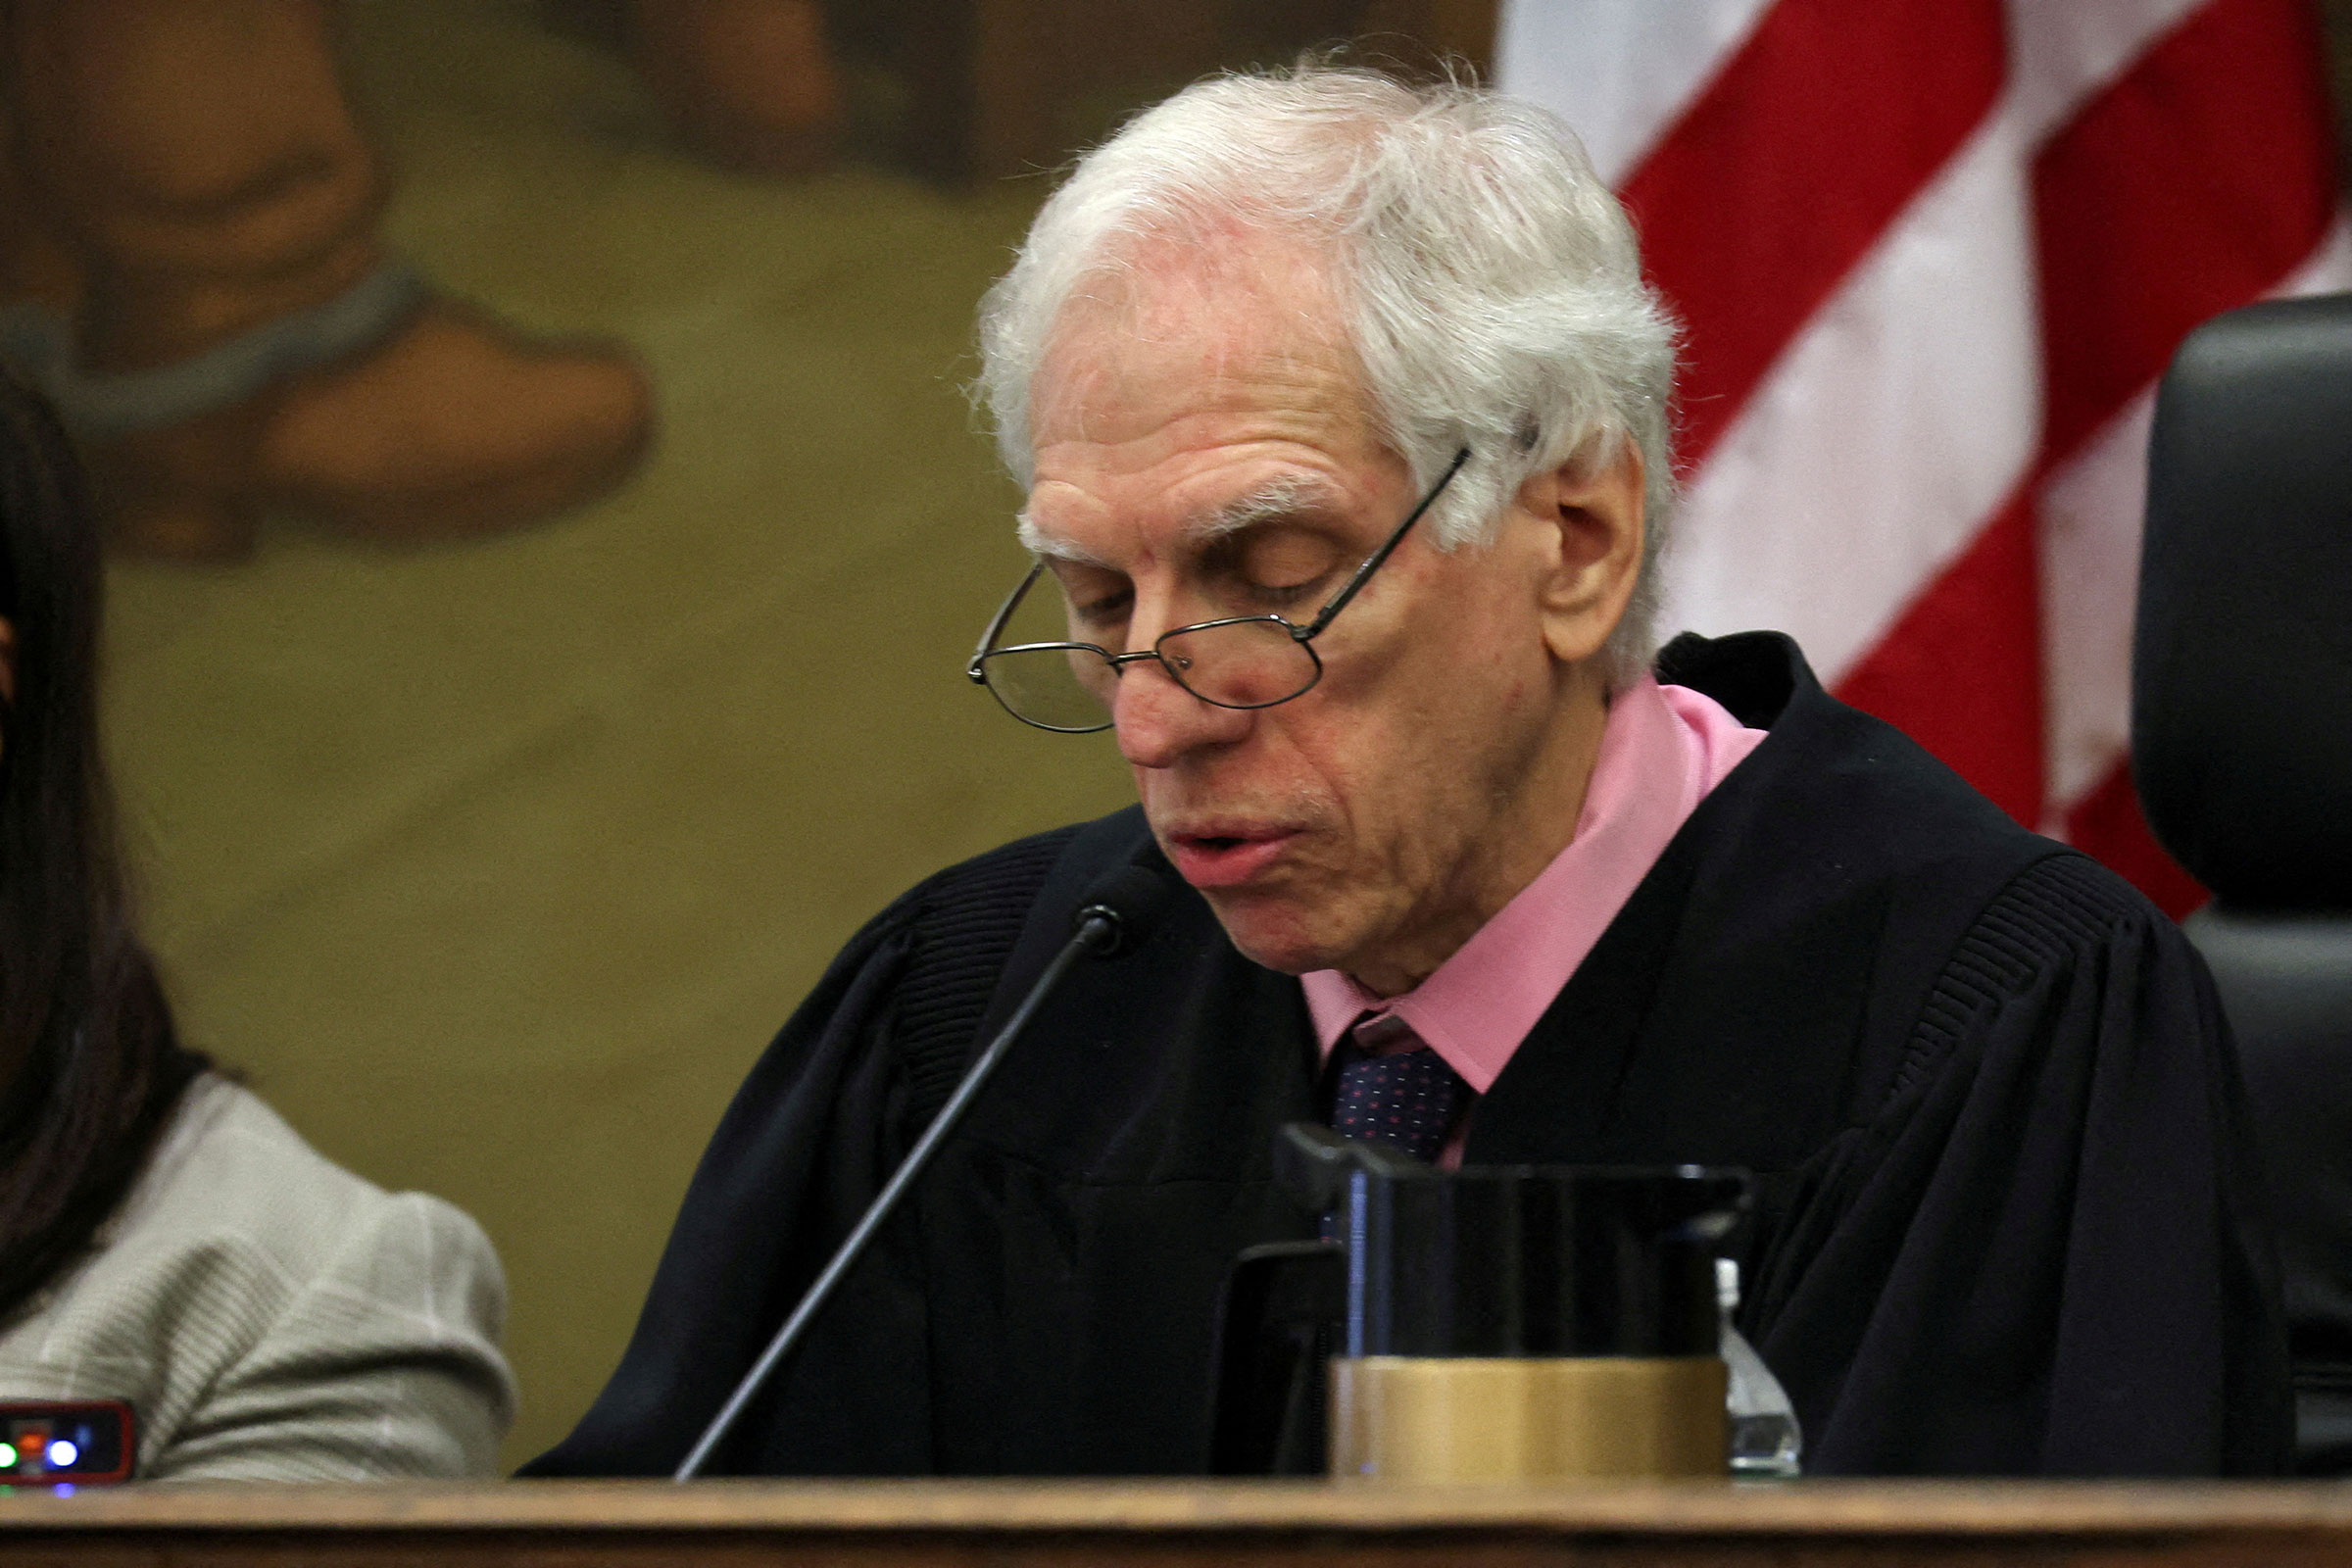 Justice Arthur Engoron speaks during the trial of former President Donald Trump, his adult sons, the Trump Organization and others in a civil fraud case brought by state Attorney General Letitia James, at a Manhattan courthouse, in New York City, in October 2023.